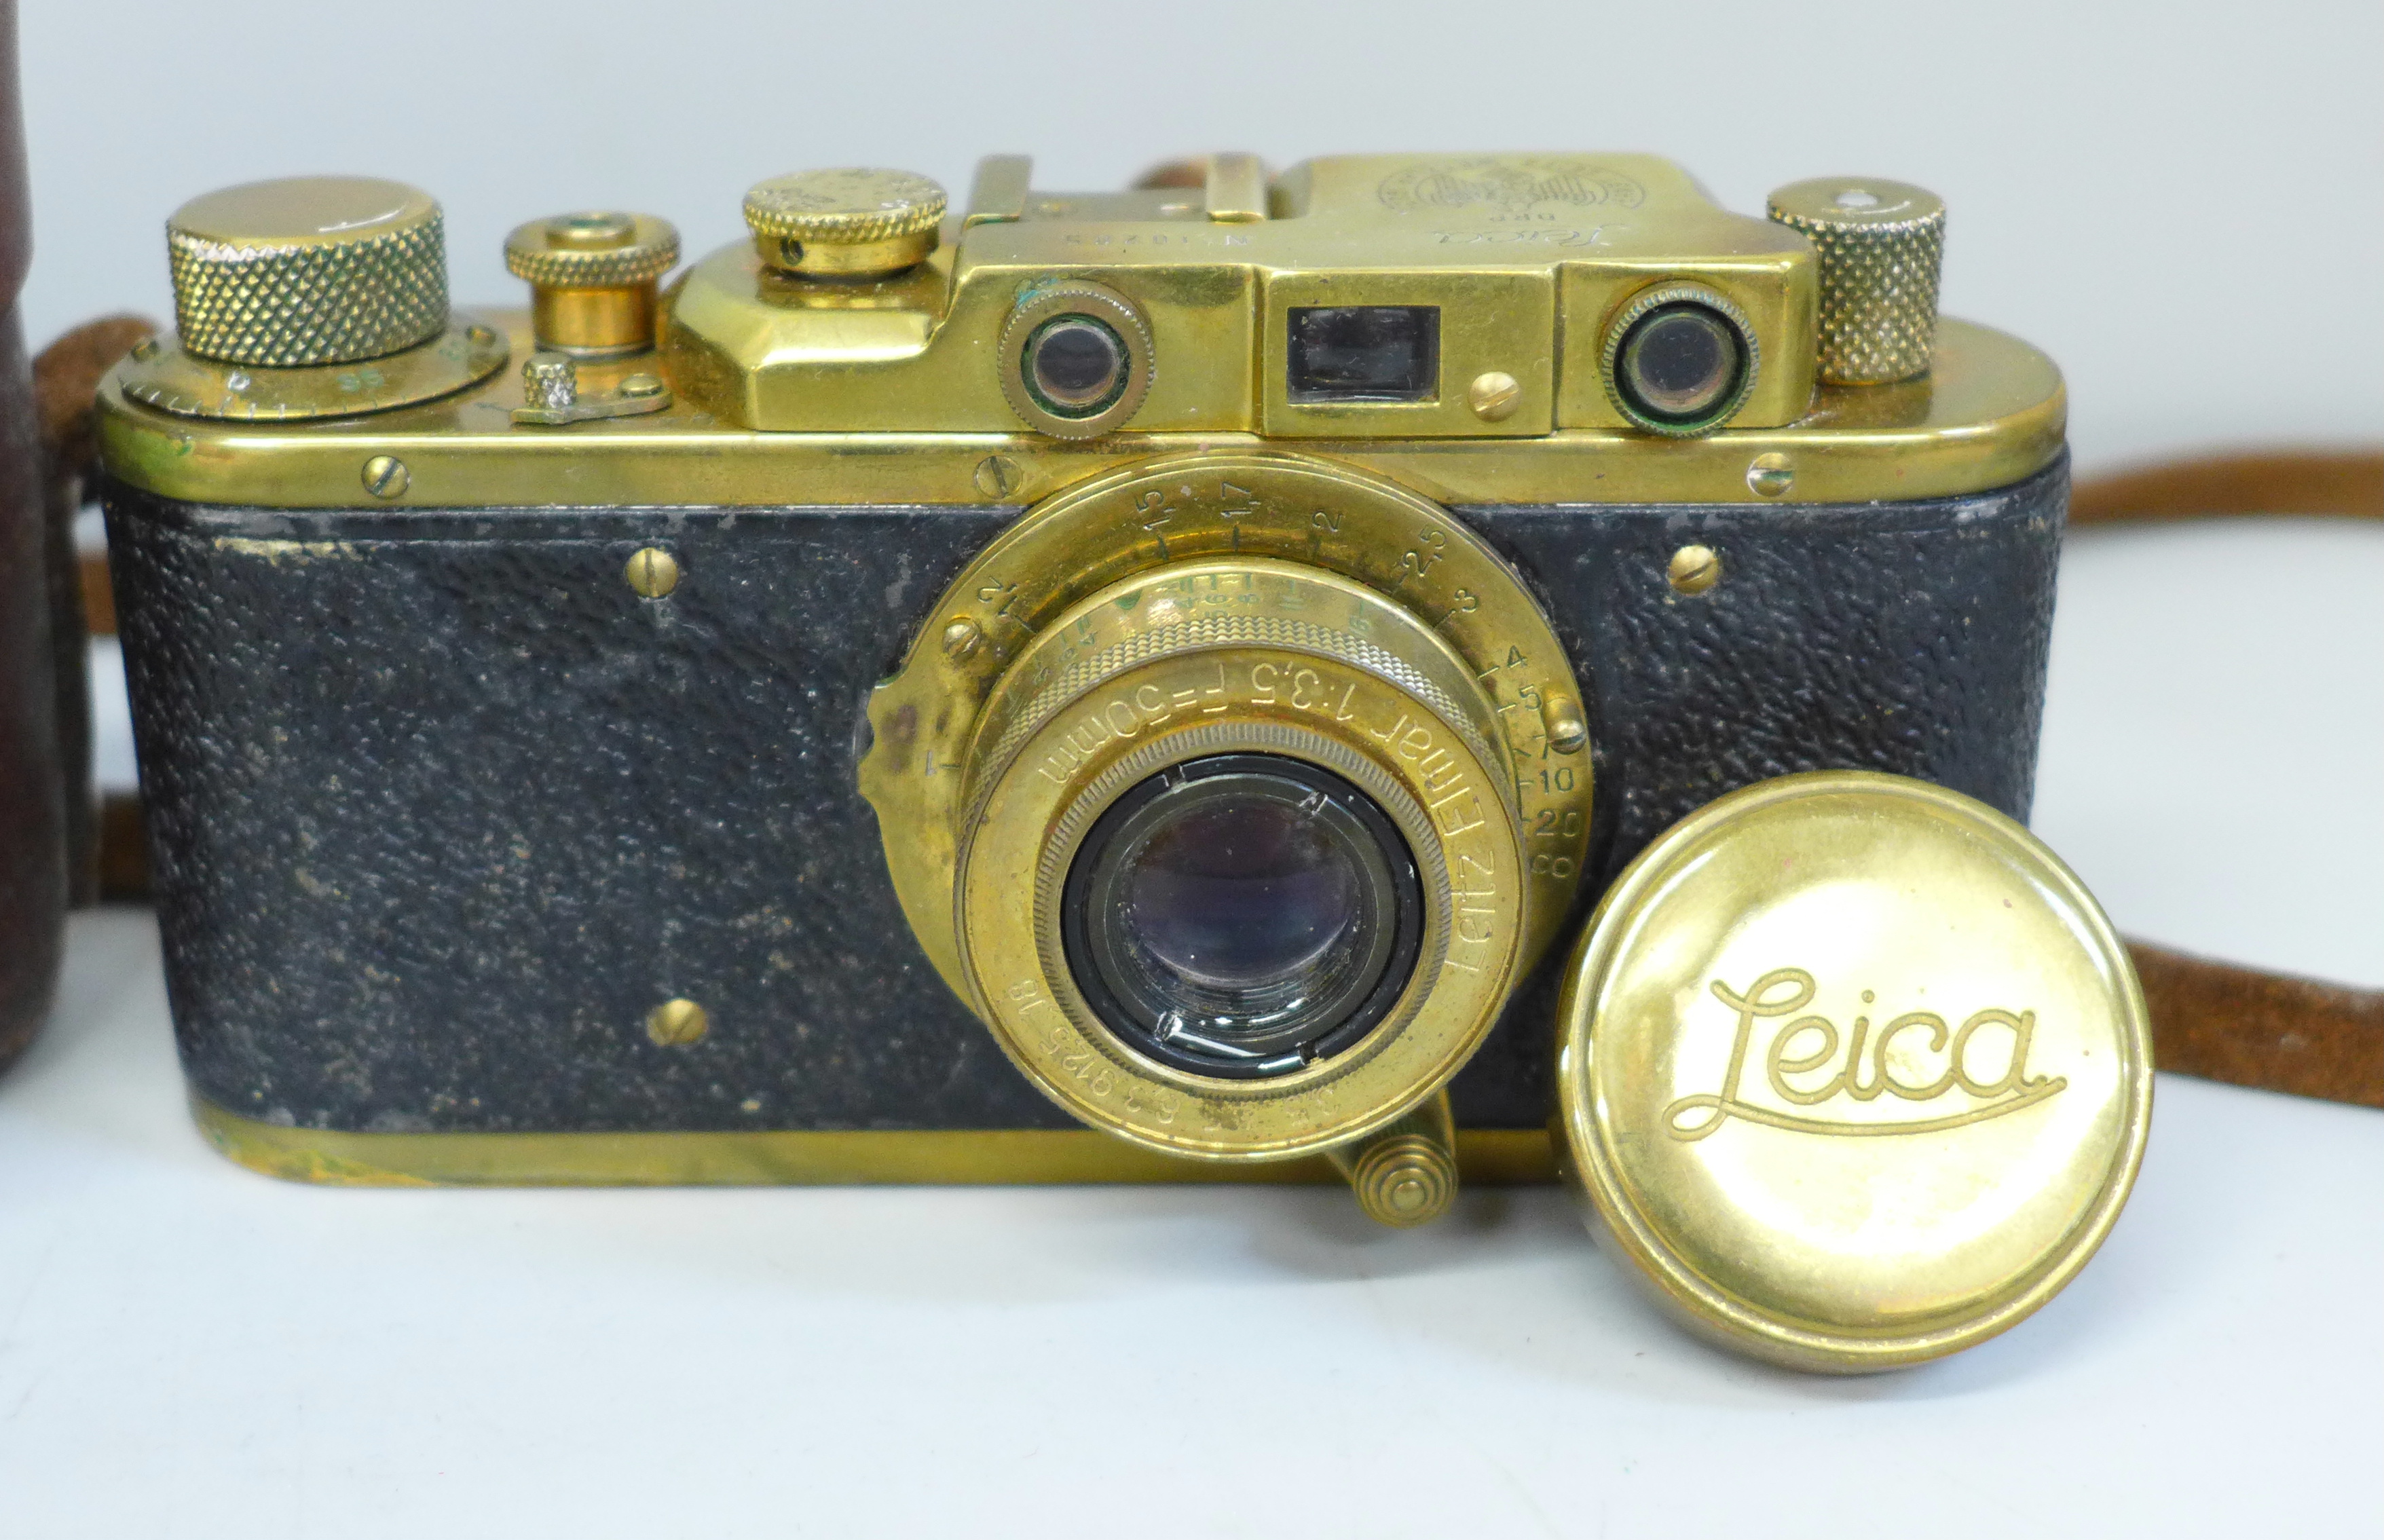 A Leica brass 1923 copy camera and leather case, made in Russia - Image 2 of 3